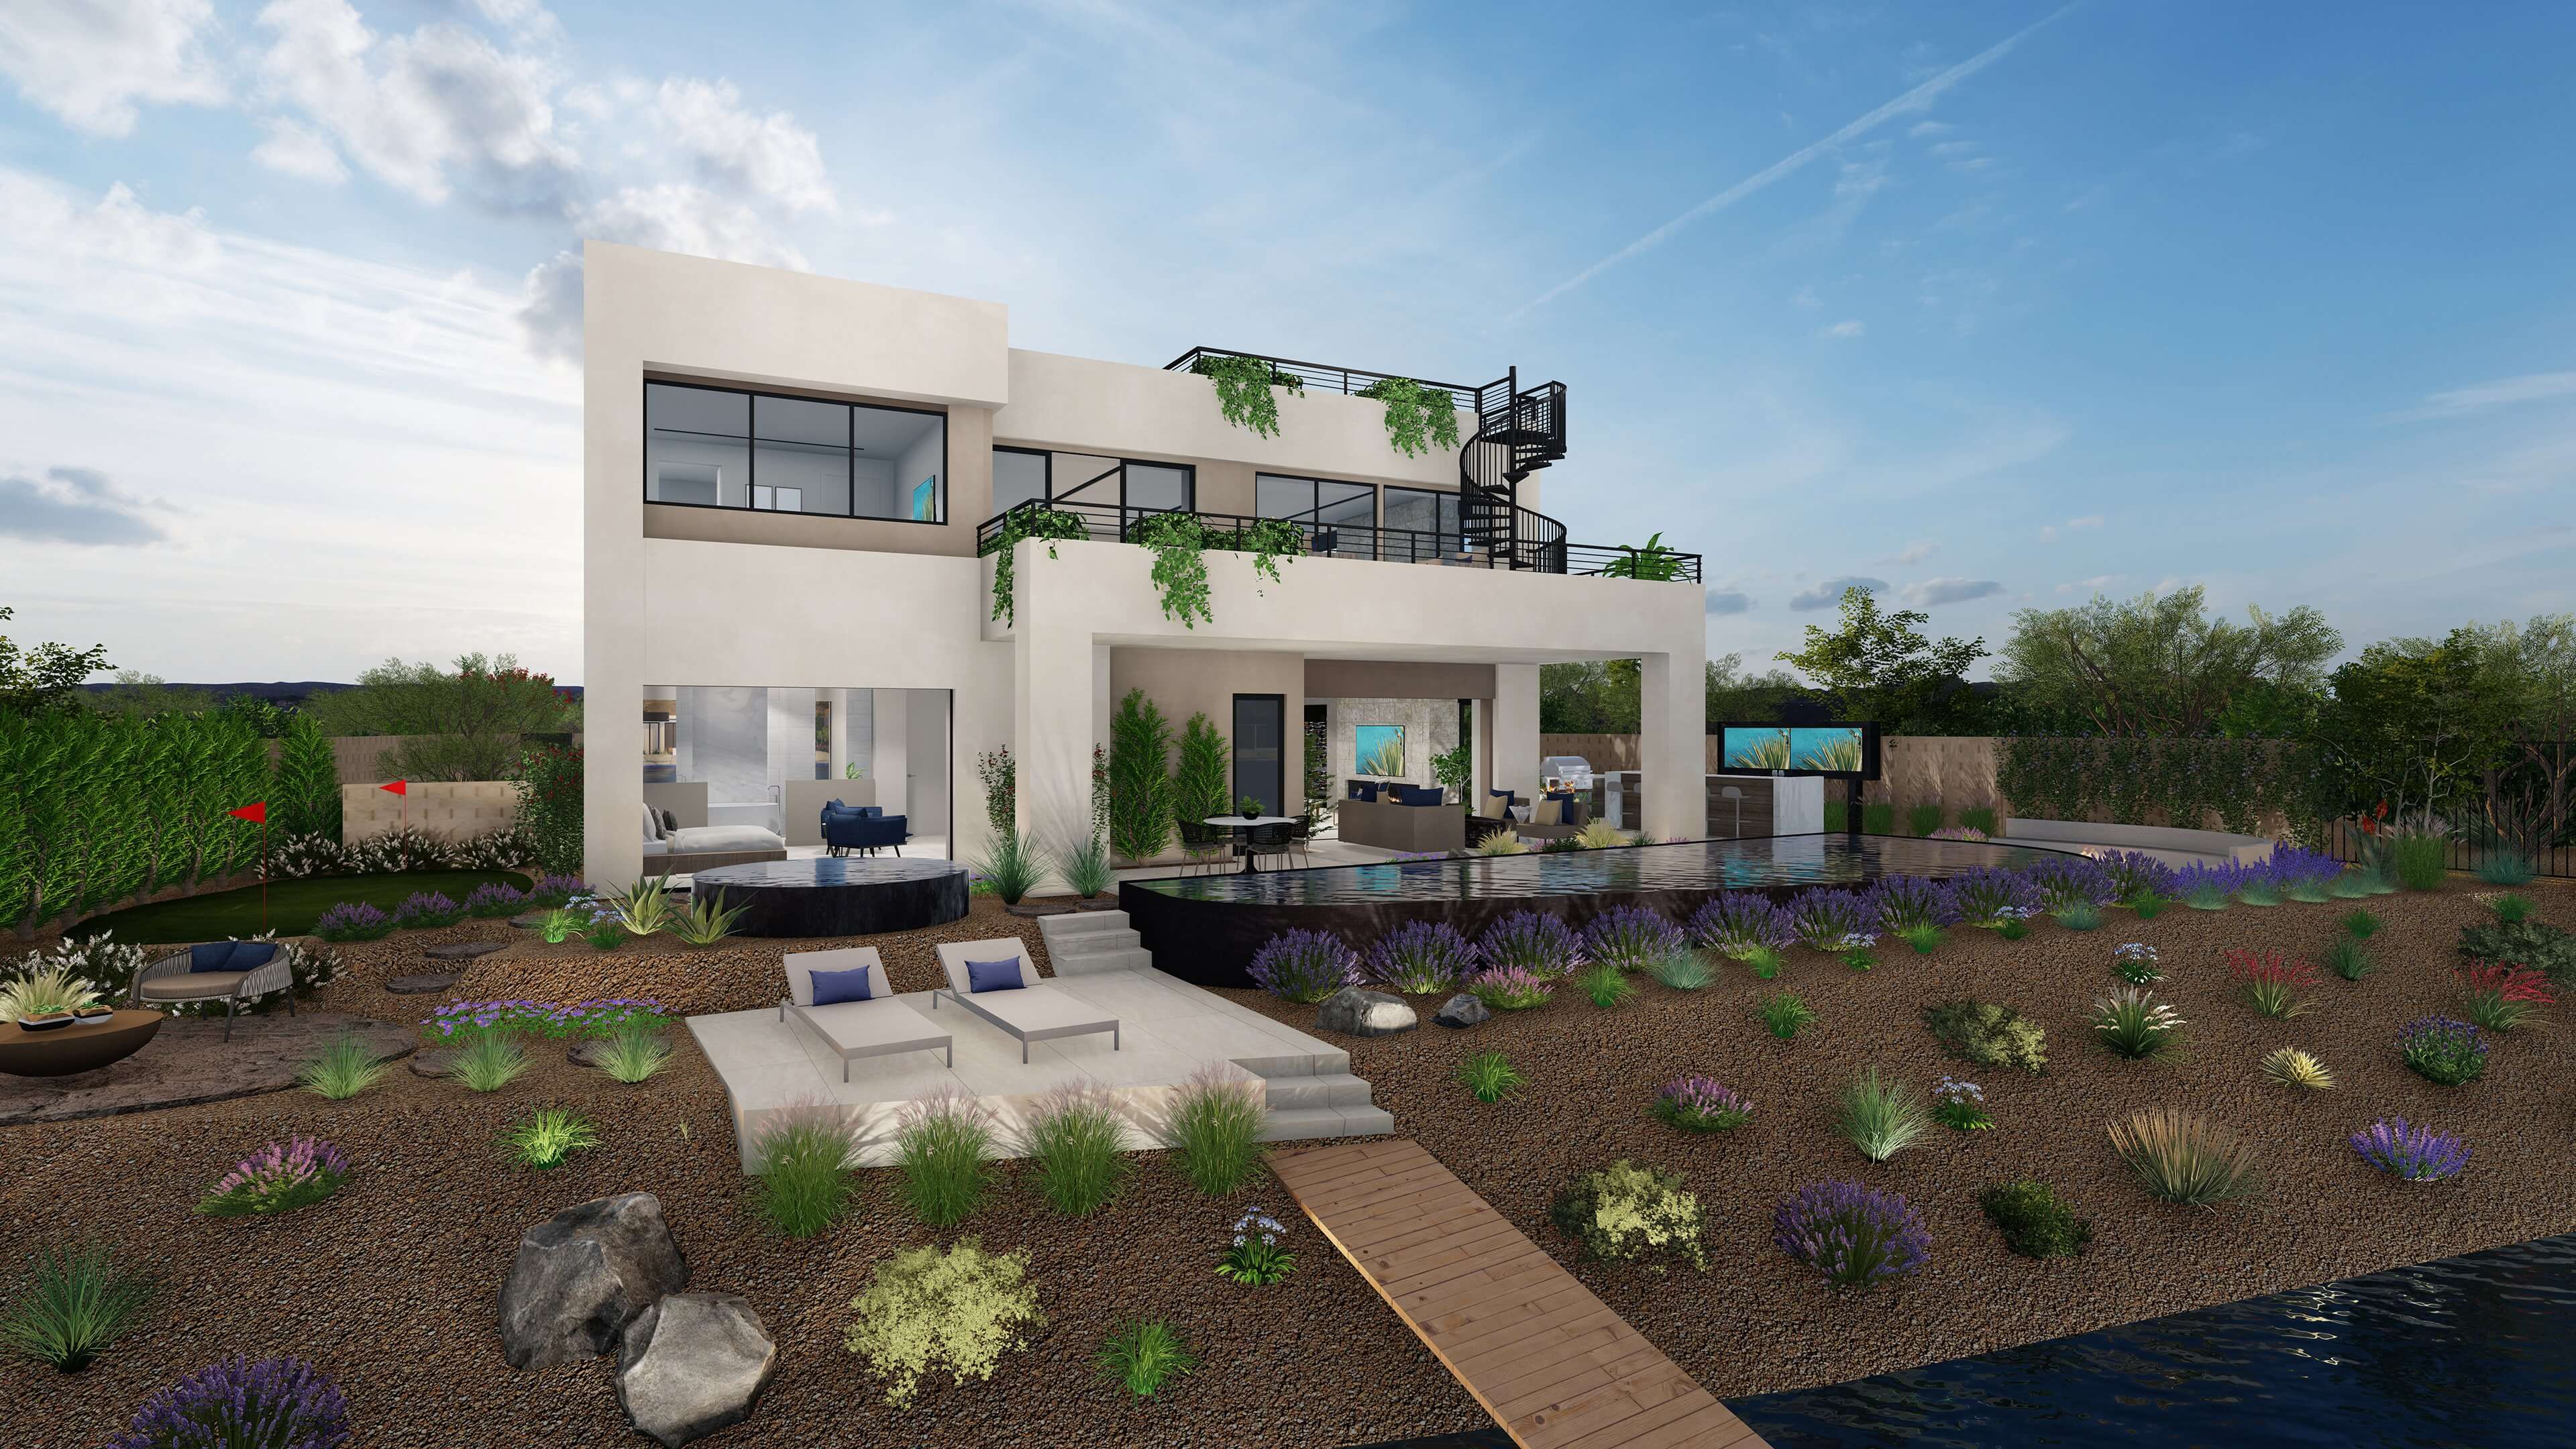 Rear exterior of Blue Heron's new Floorplan, Trace, at Velaris in Lake Las Vegas. Lounge chairs, pool, landscaping, and light, airy color scheme.